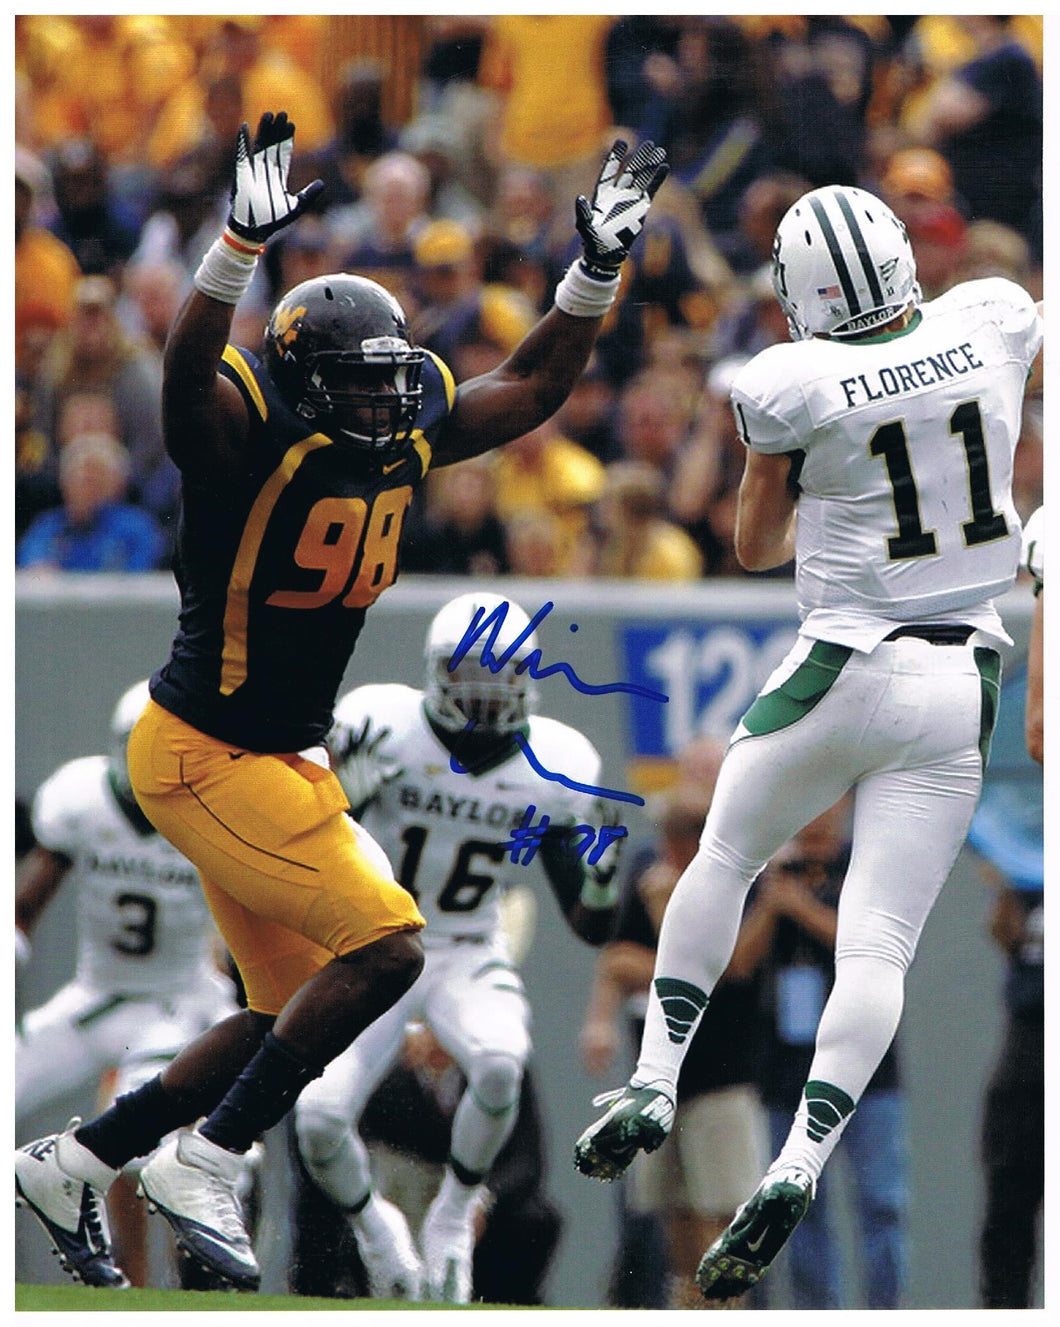 Will Clarke West Virginia Mountaineers Autographed 8x10 Photo